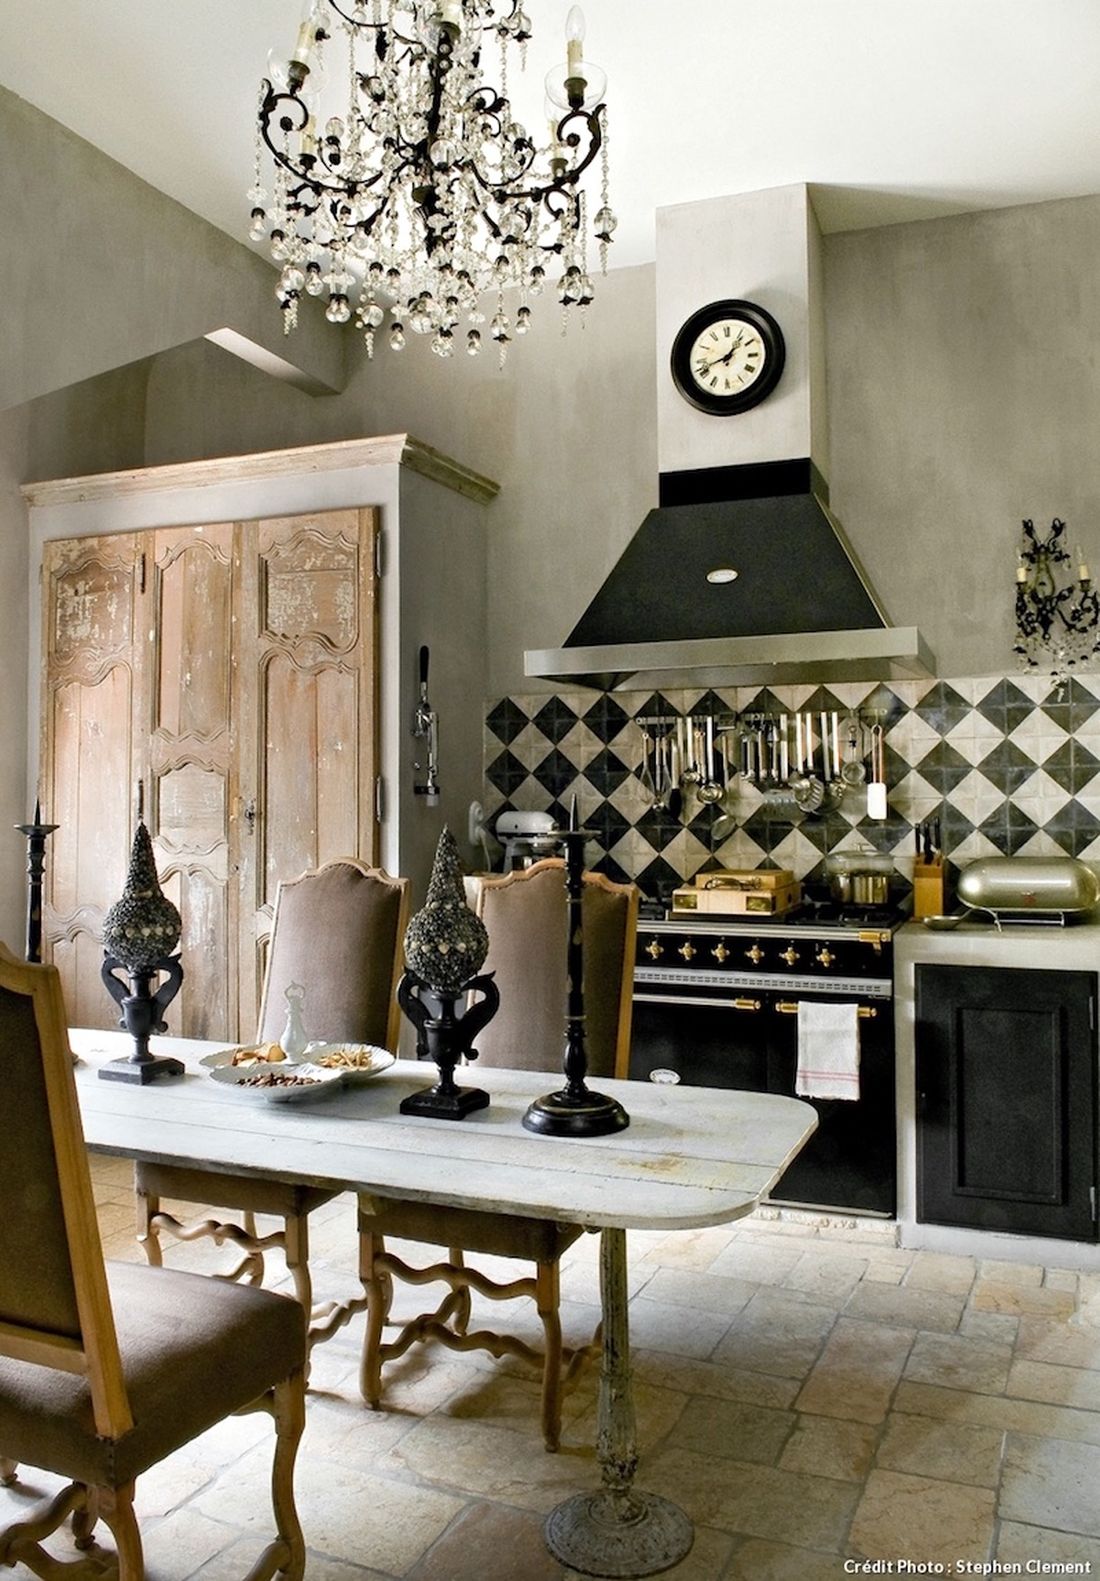 French Country Kitchen with Checkered Backsplash Tile via Maison Creative